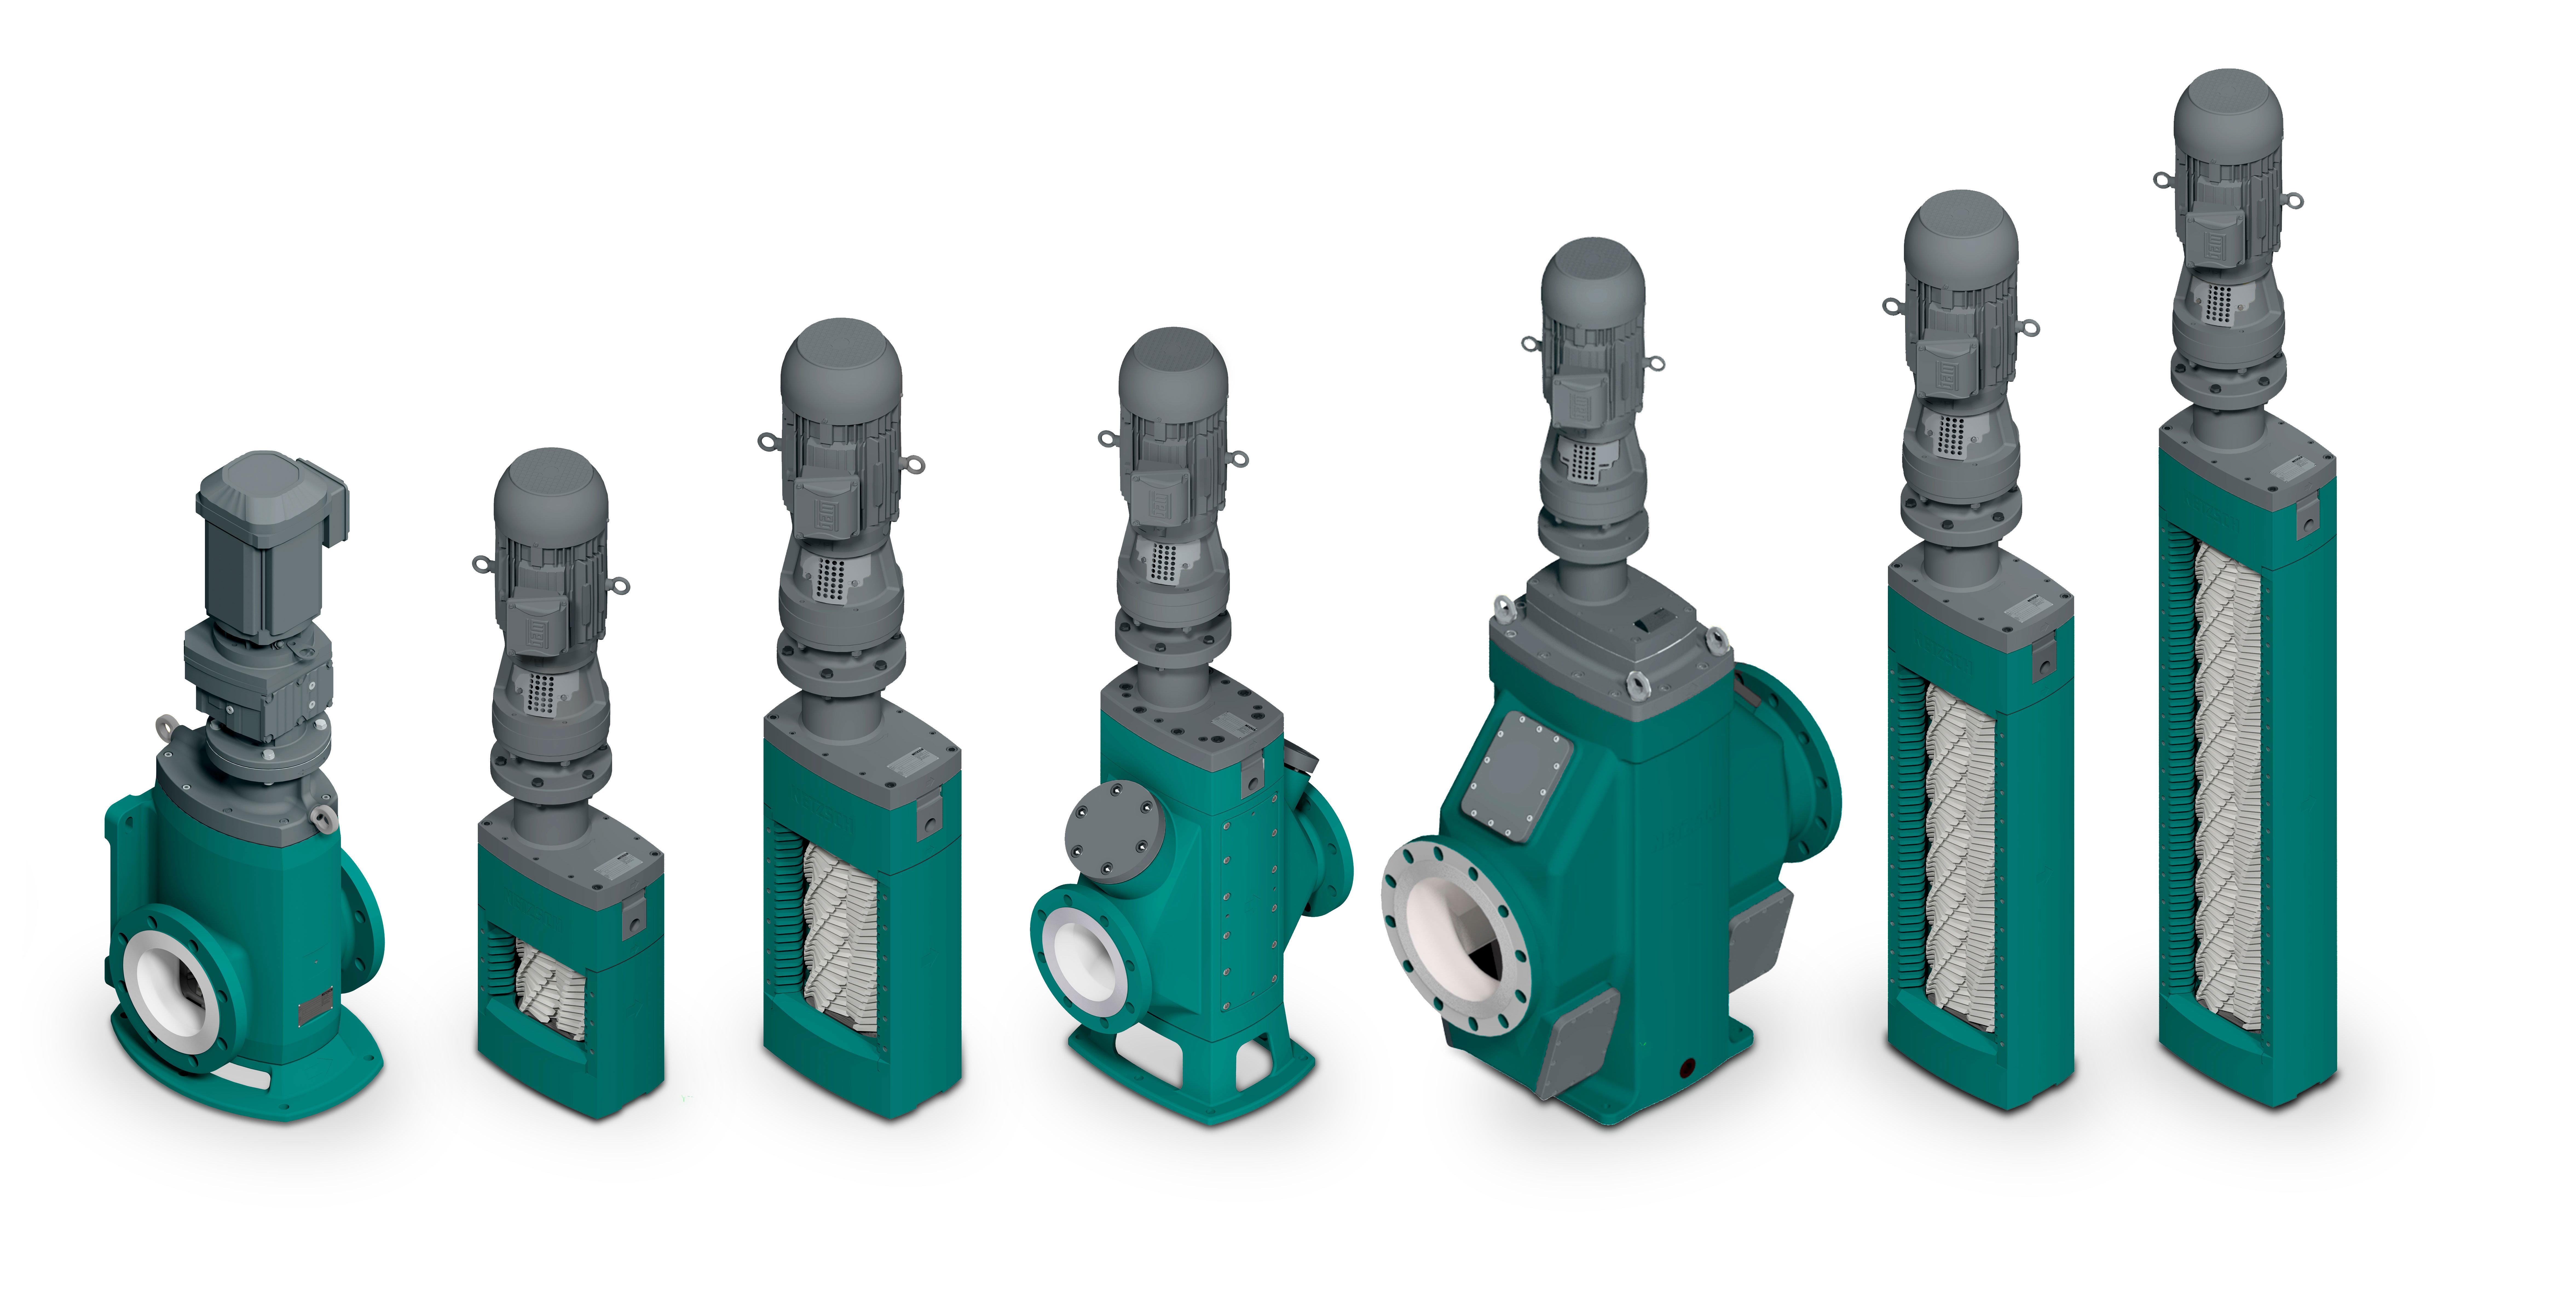 The Netzsch N.Mac twin shaft grinder extends the company’s product range sizes for flow rates up to 400 m³/h.